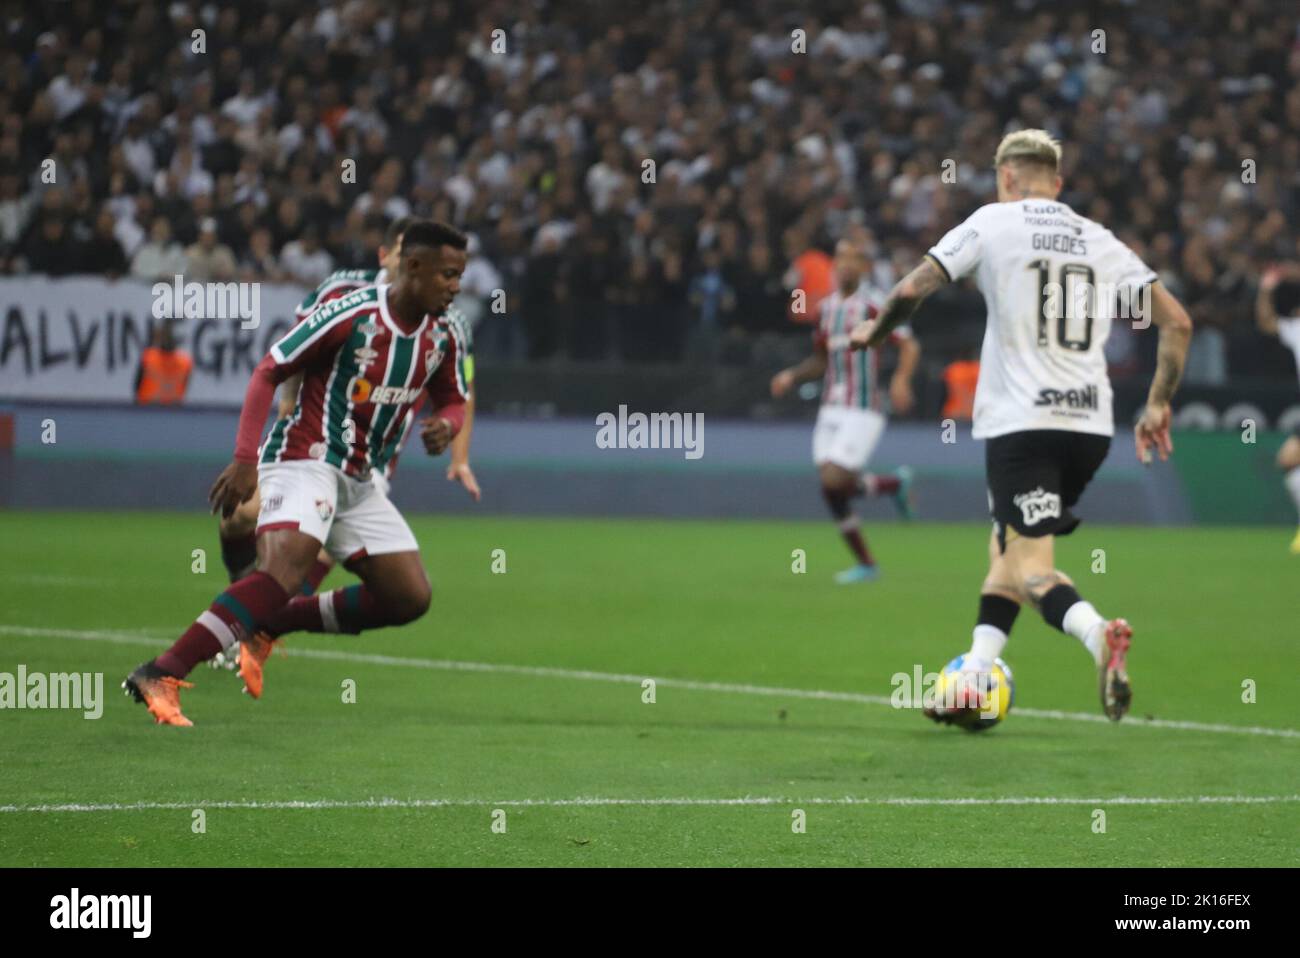 Sao Paulo, Brazil. 15th Sep, 2022. Brazil Soccer Cup - Semifinal: Corinthians vs Fluminense. September 15, 2022, Sao Paulo, Brazil: Soccer match between Corinthians and Fluminense, valid for the return clash of the Brazil Soccer Cup, held at Neo Quimica Arena, in Sao Paulo, on Thursday (15). Corinthians team won the match by the score of 3-0, with goals scored by Renato Augusto, Giuliano and Felipe Melo (against). With the result, Corinthians advanced to the final of the competition. Credit: ZUMA Press, Inc./Alamy Live News Stock Photo